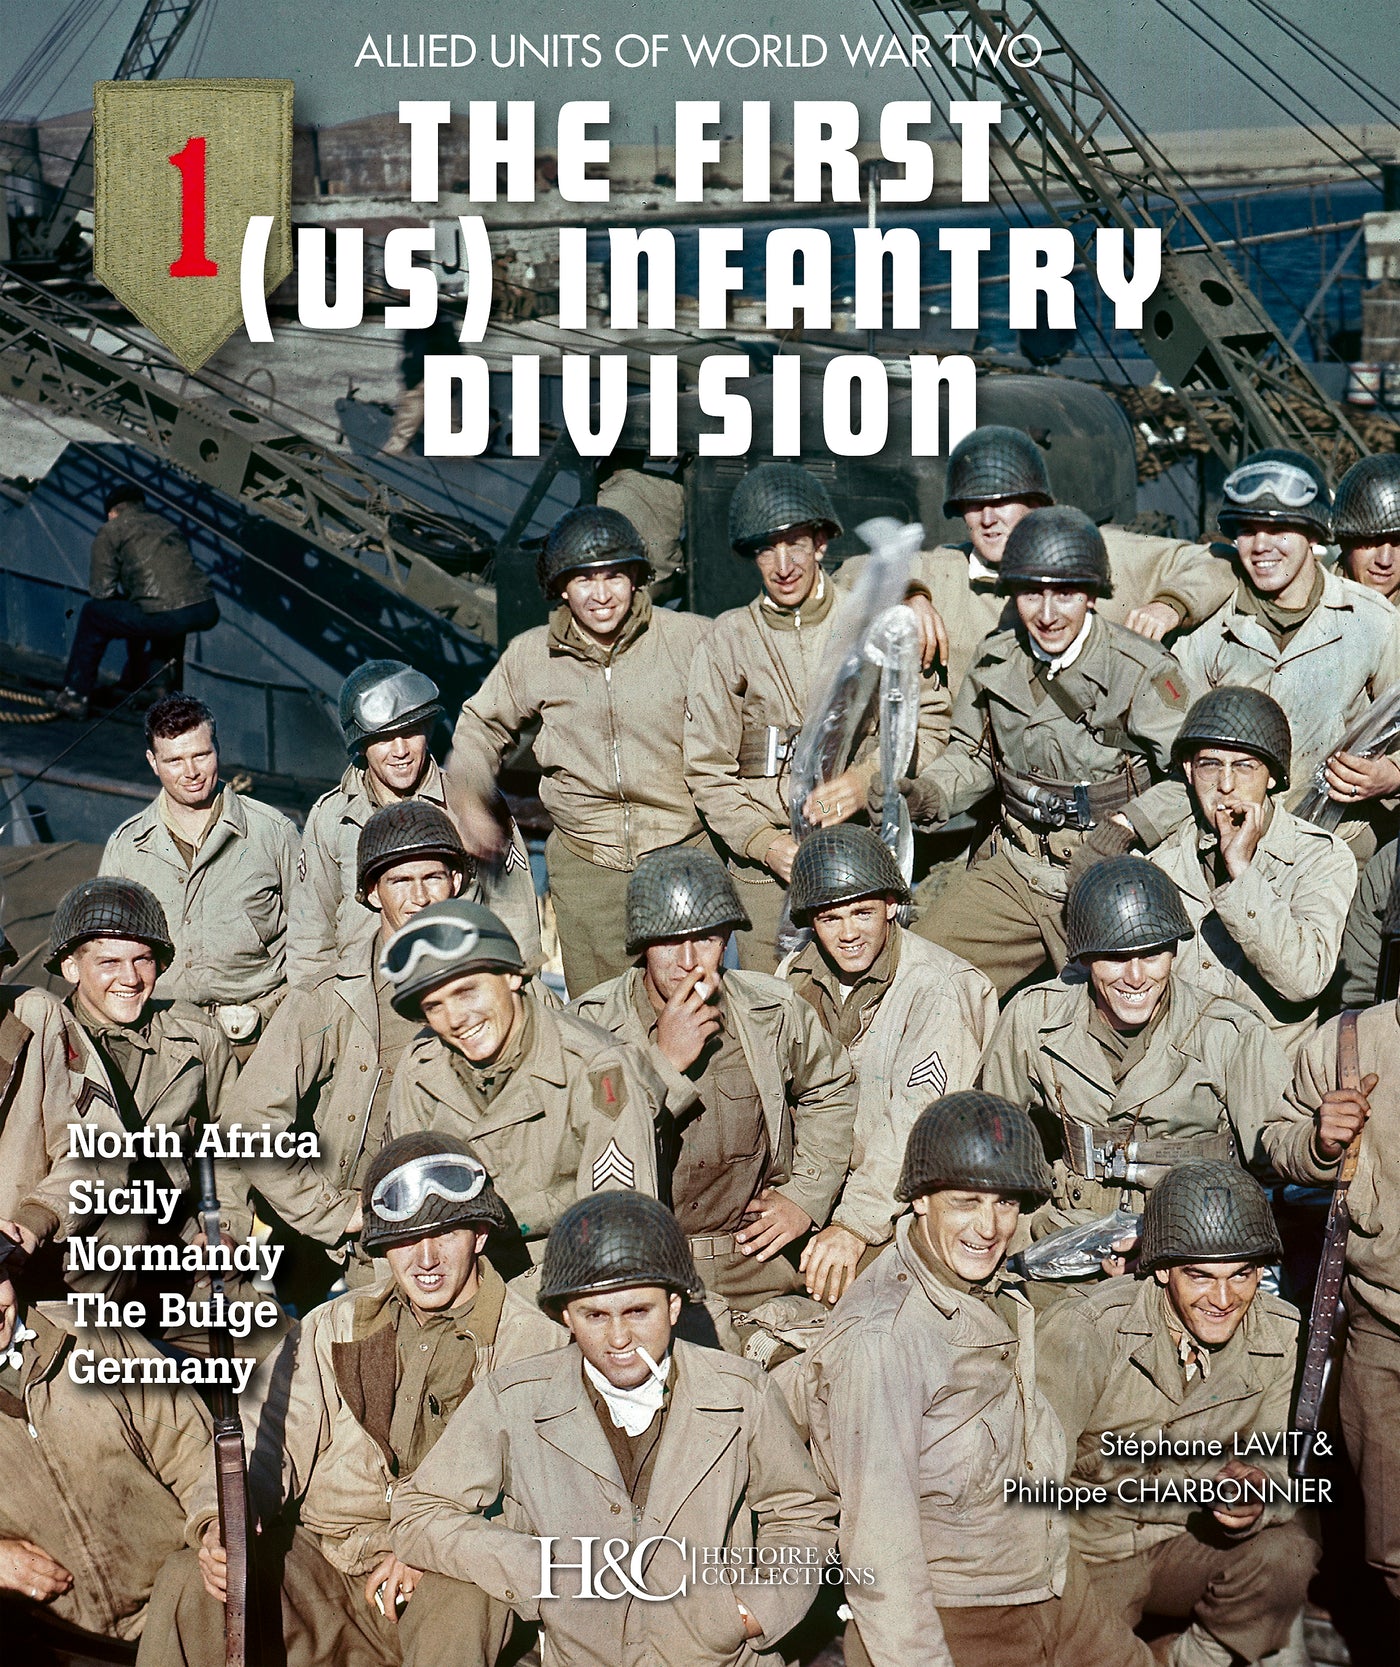 The 1st (US) Infantry Division